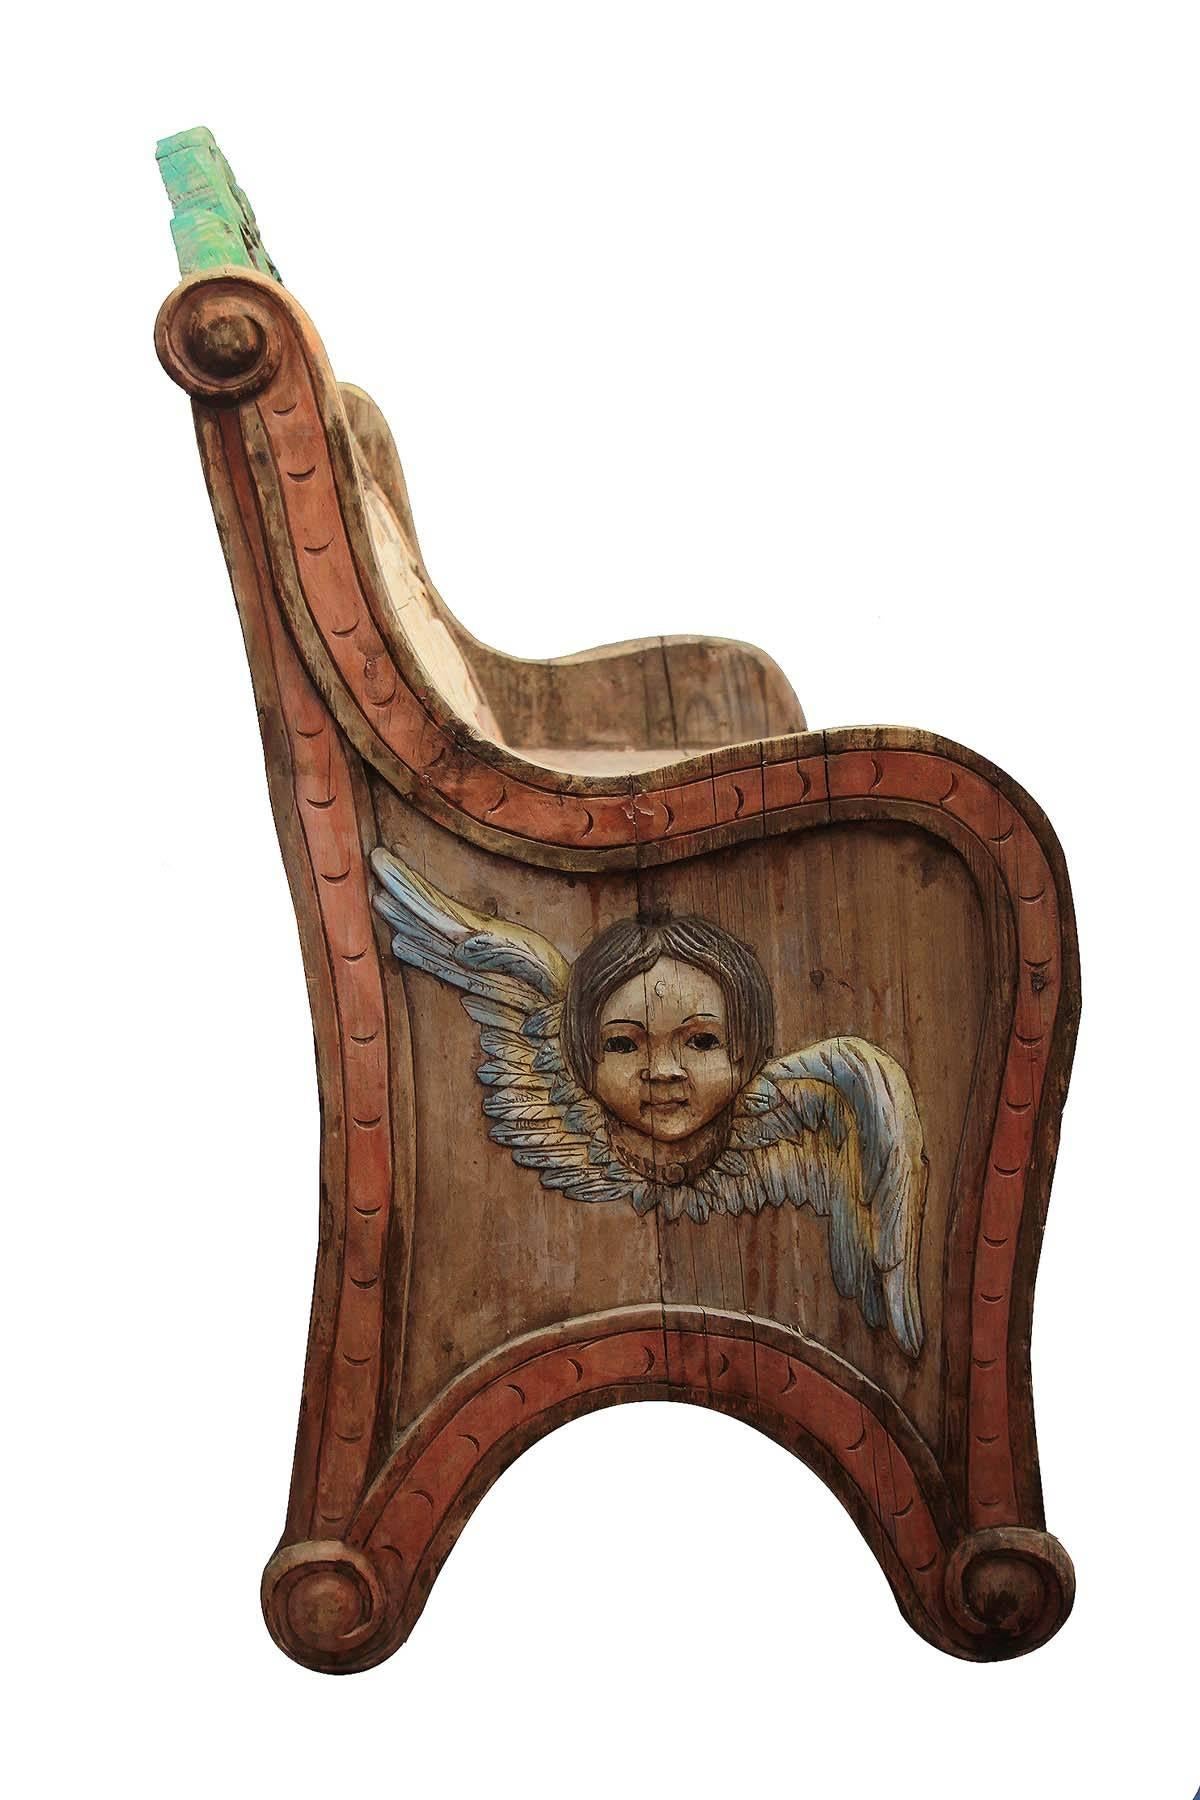 Amazing early American Folk Art bench. The carving is amazing and detailed. Color seems to have been added at a later and more than once I am sure of. Solid wood, some repairs, overall a structurally strong bench with many years left in its life.